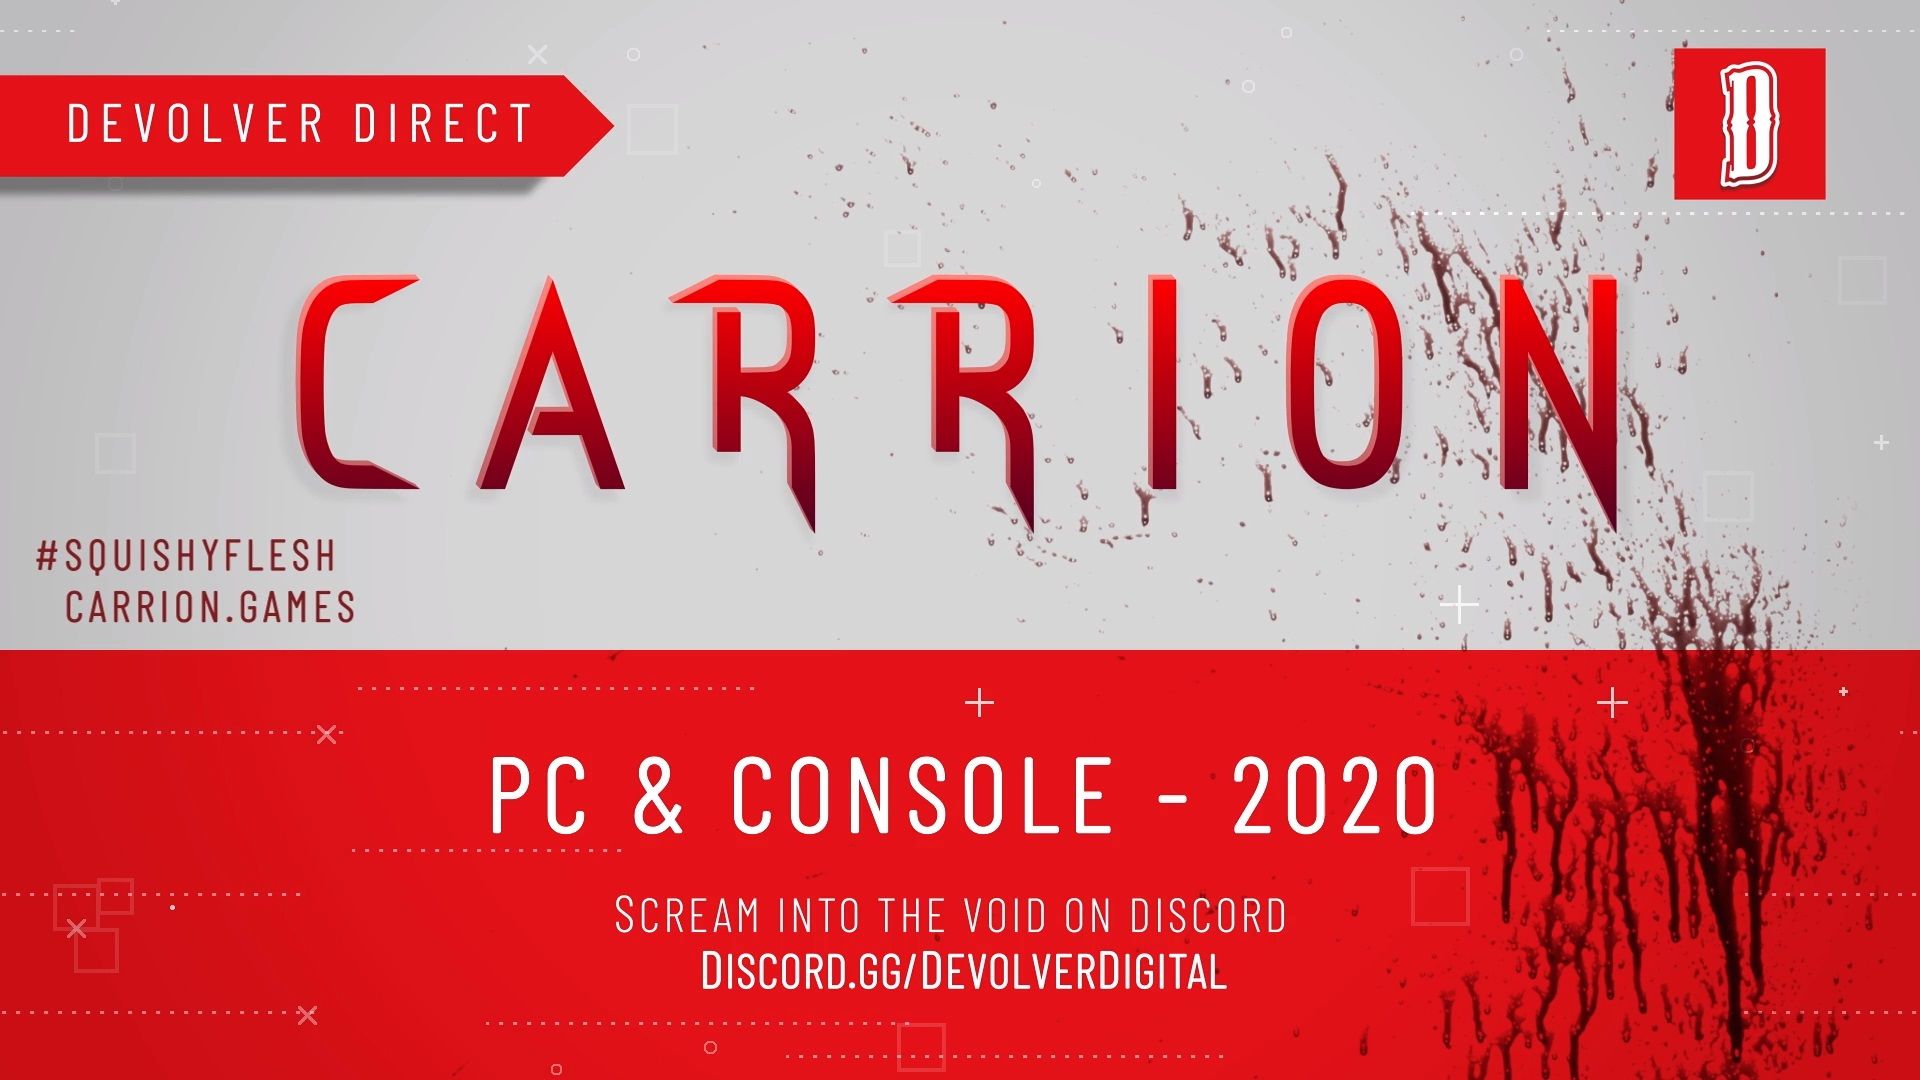 download carrion on for free